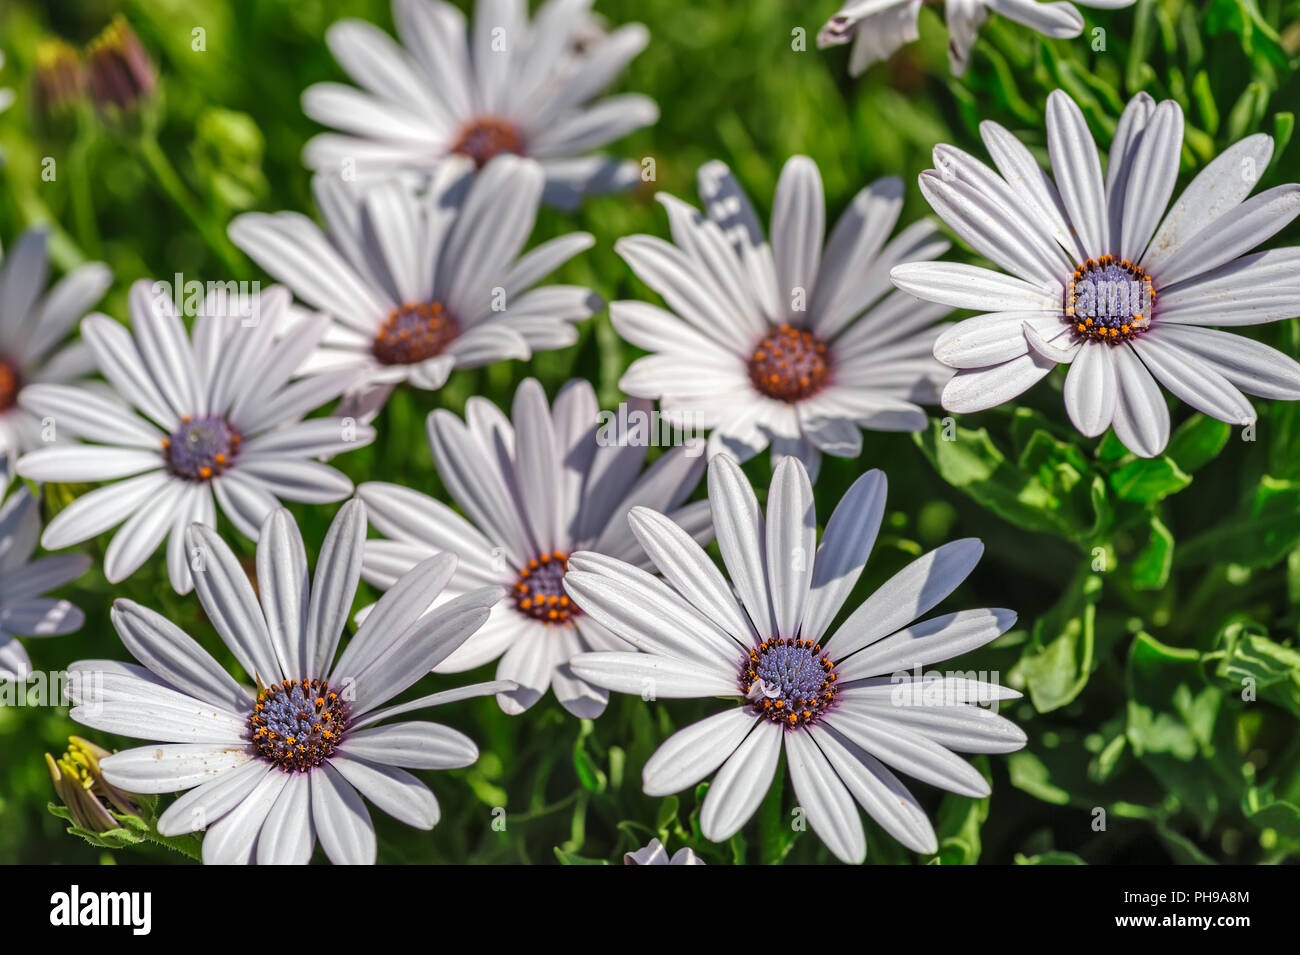 Flowers with white petals Stock Photo